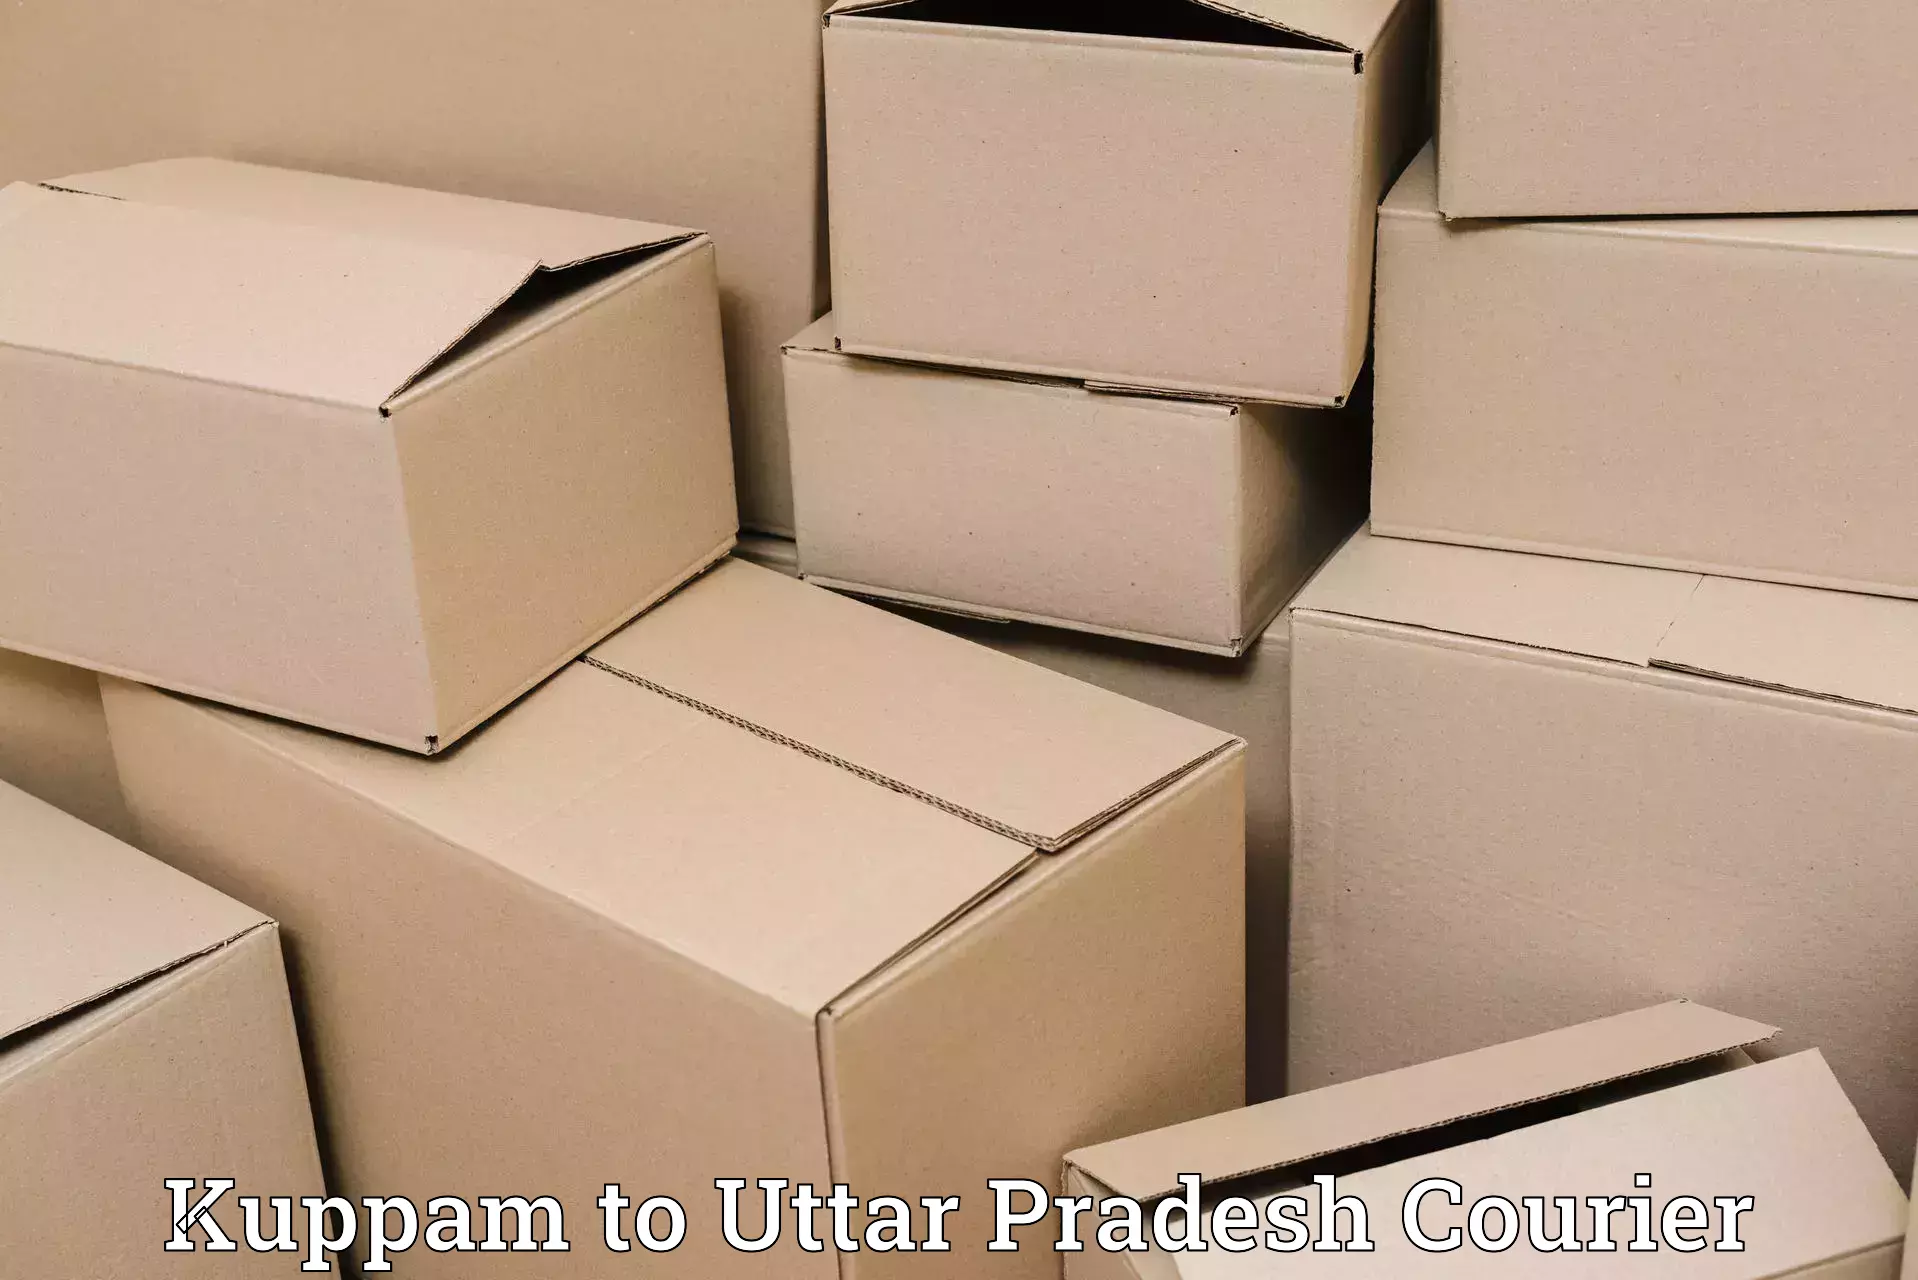 Reliable freight solutions Kuppam to Aligarh Muslim University